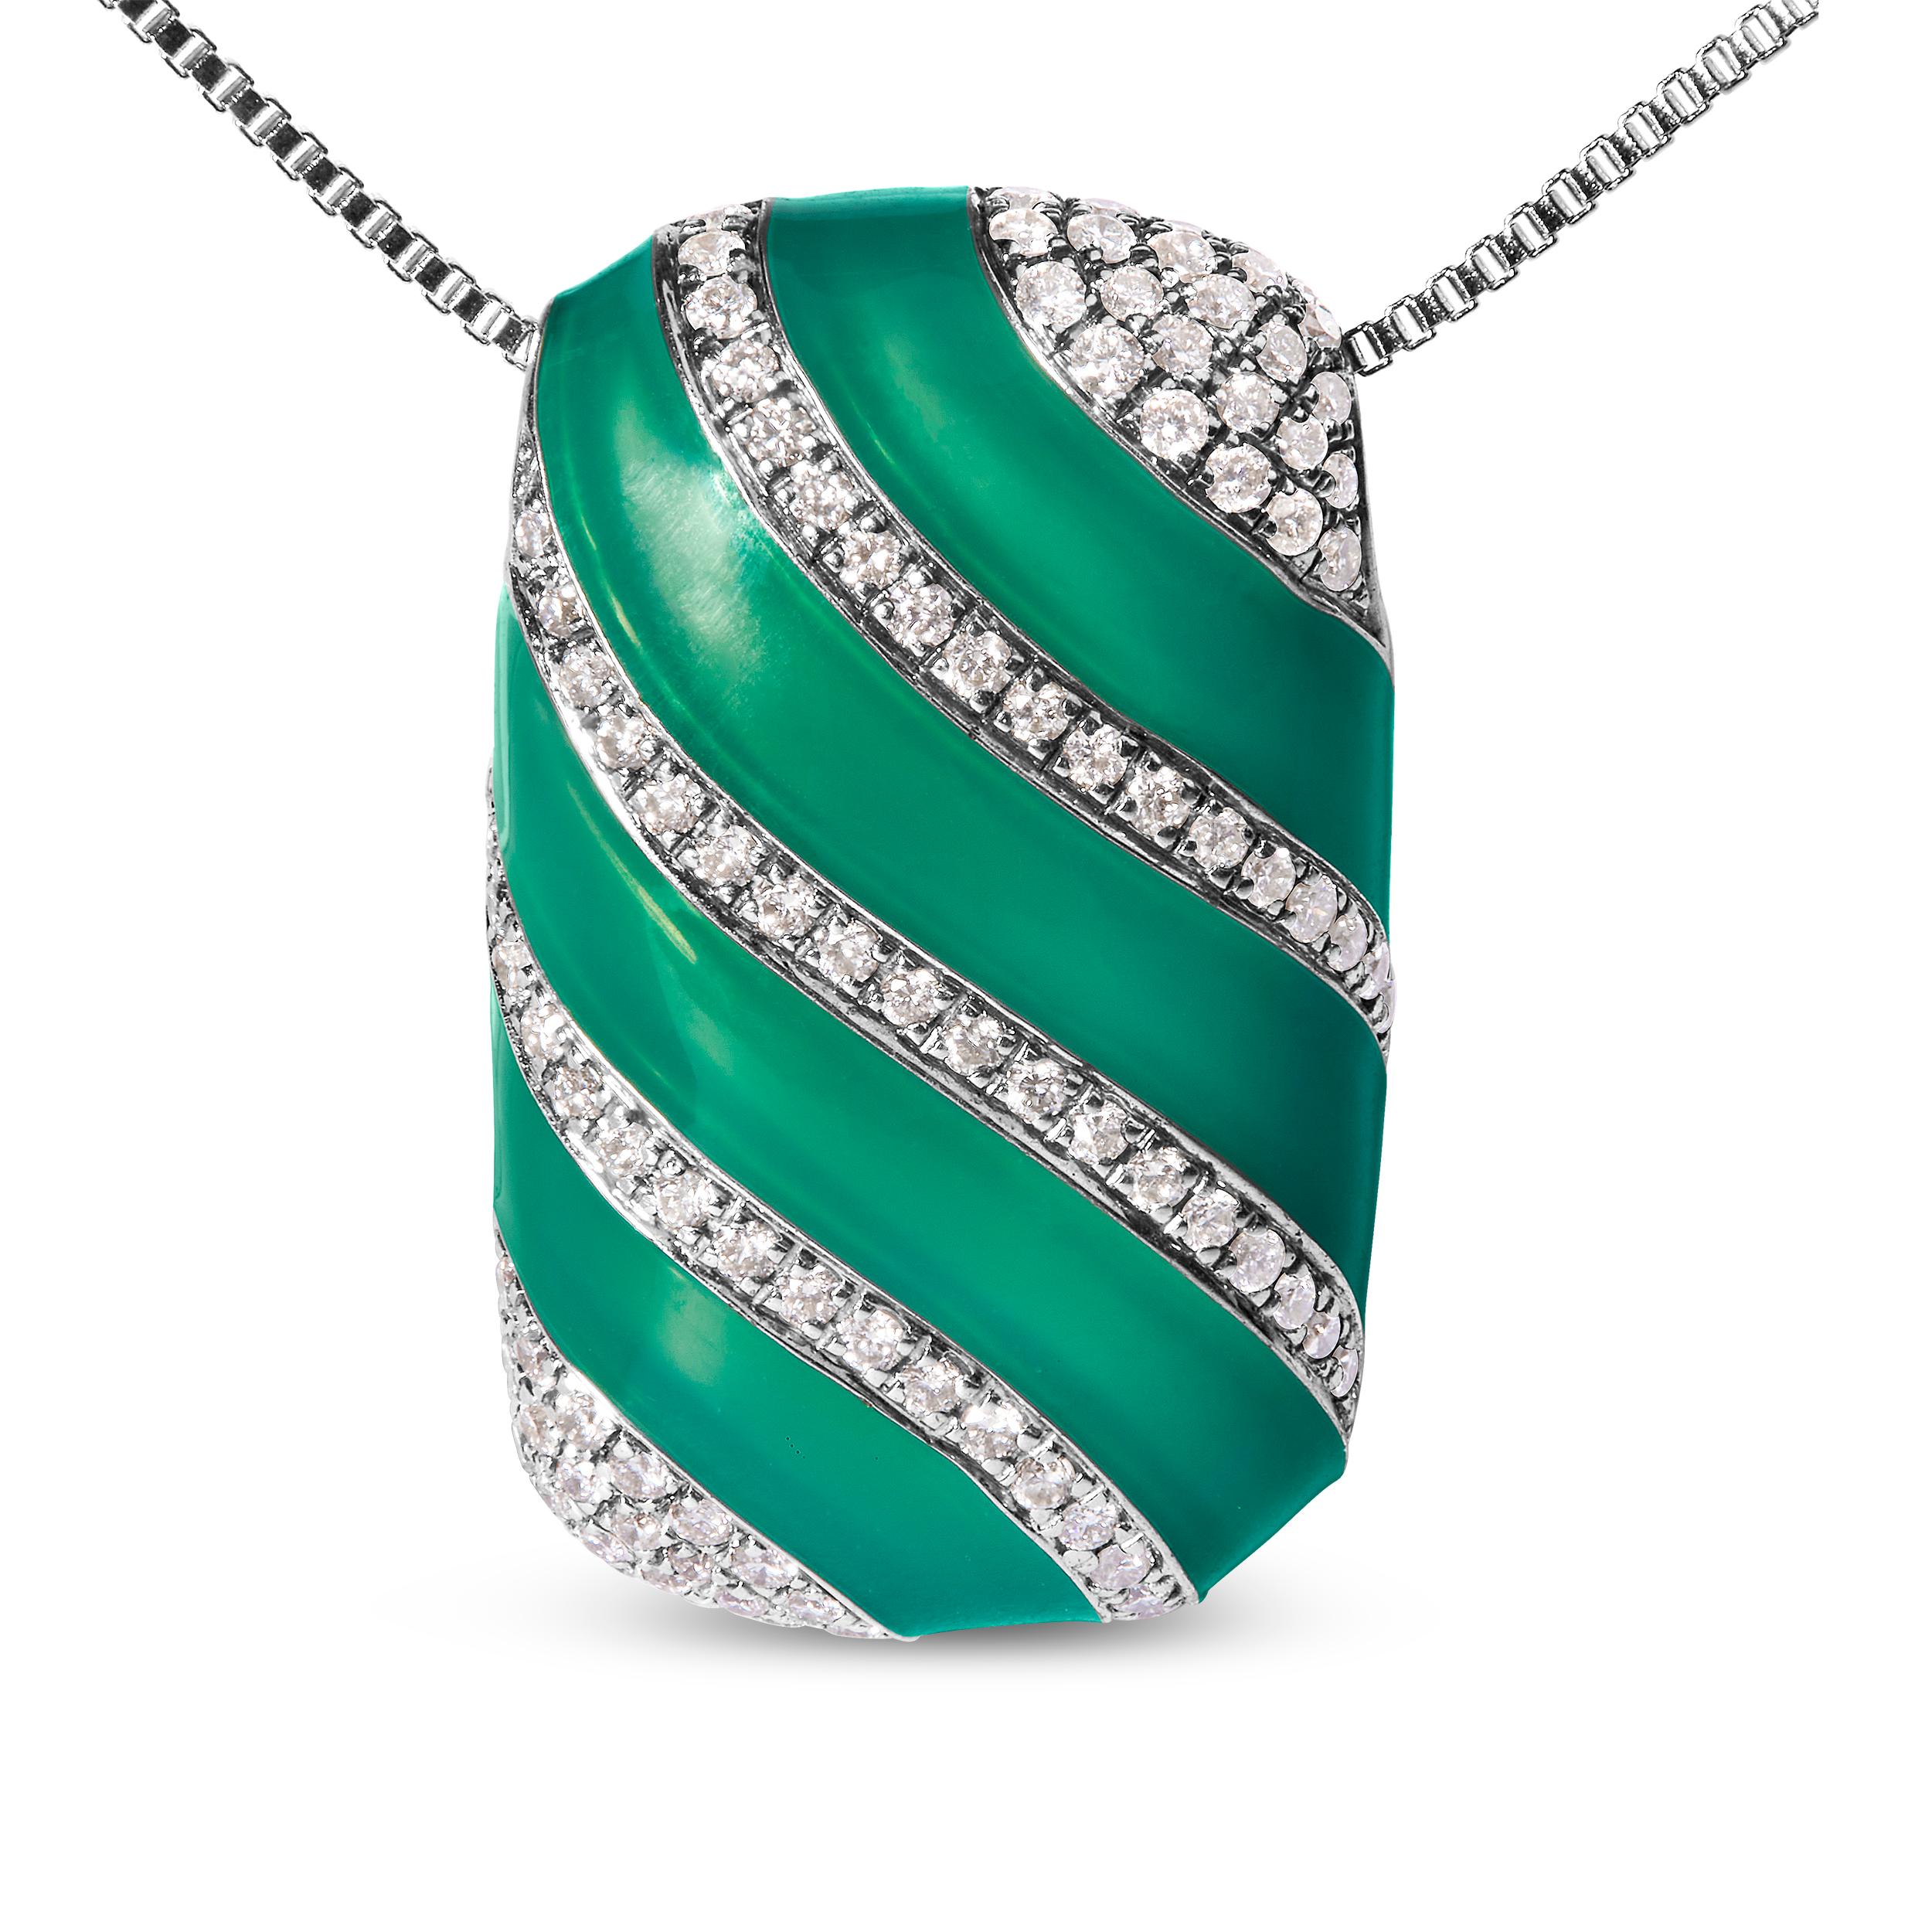 Indulge in the timeless beauty of this exquisite pendant necklace that's perfect for any occasion. Made from .925 sterling silver, this piece features a stunning turquoise enamel design that's sure to catch the eye. But what truly sets this necklace